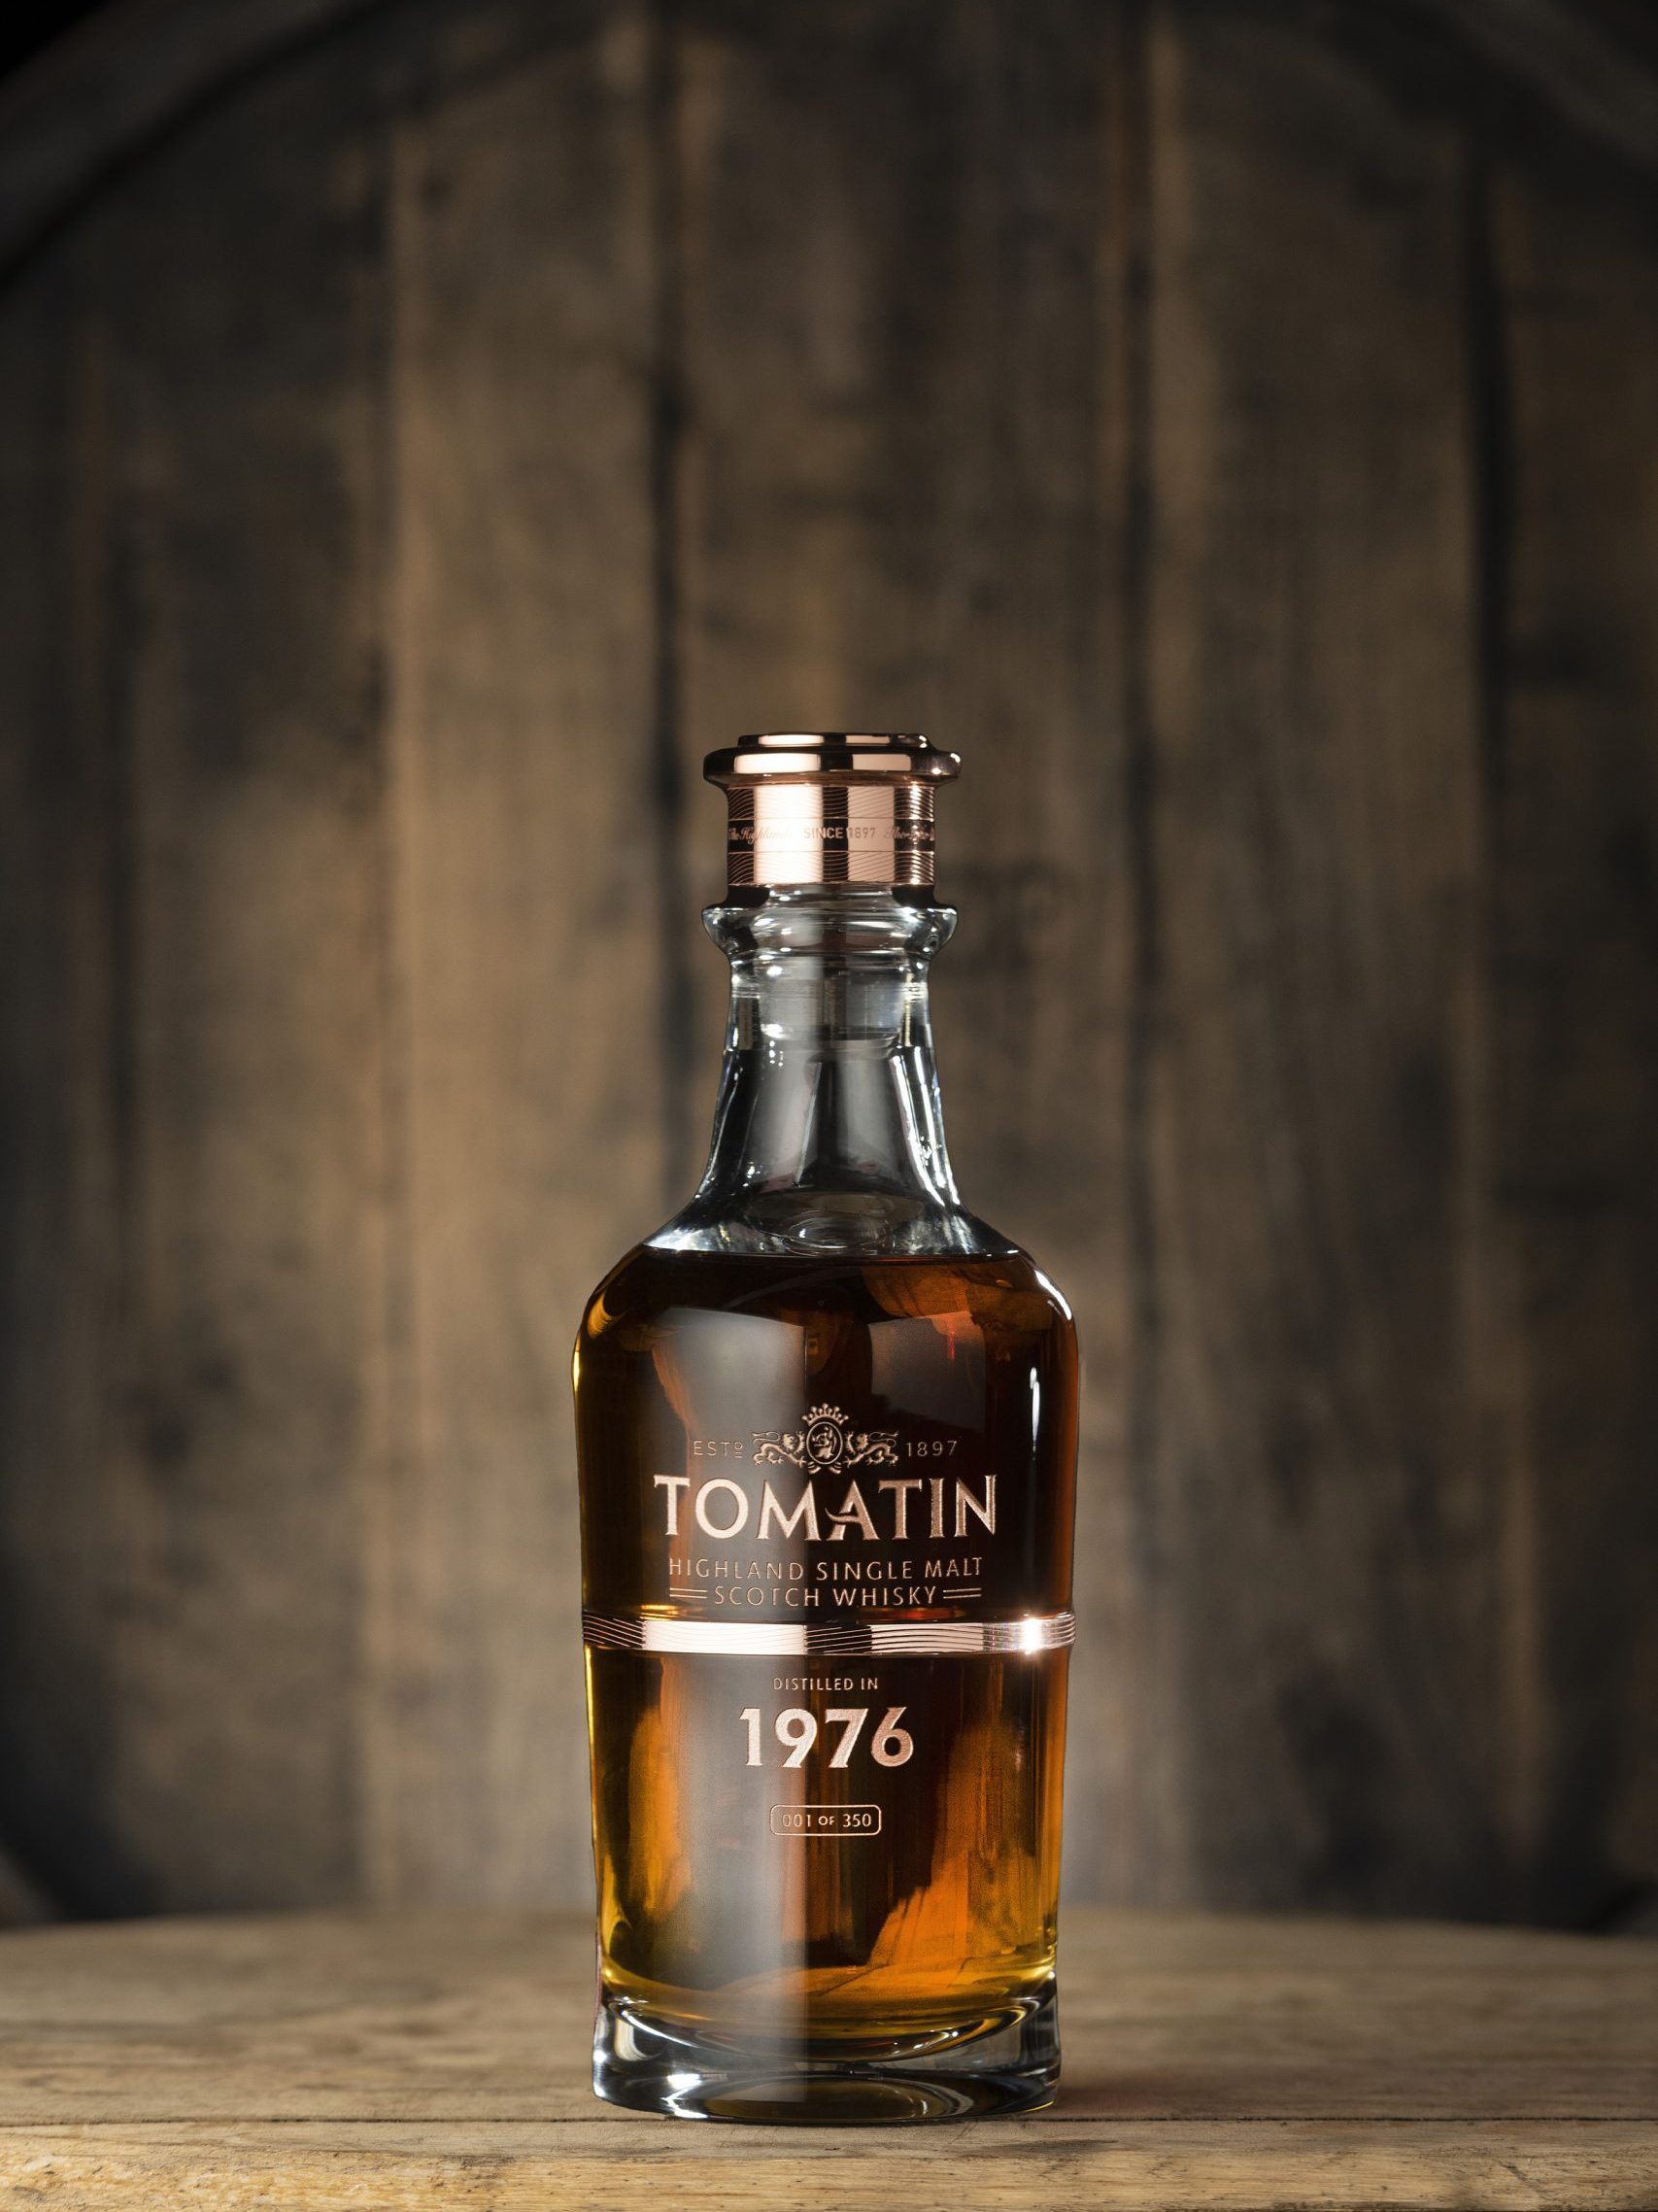 Tomatin’s Final Warehouse 6 Release